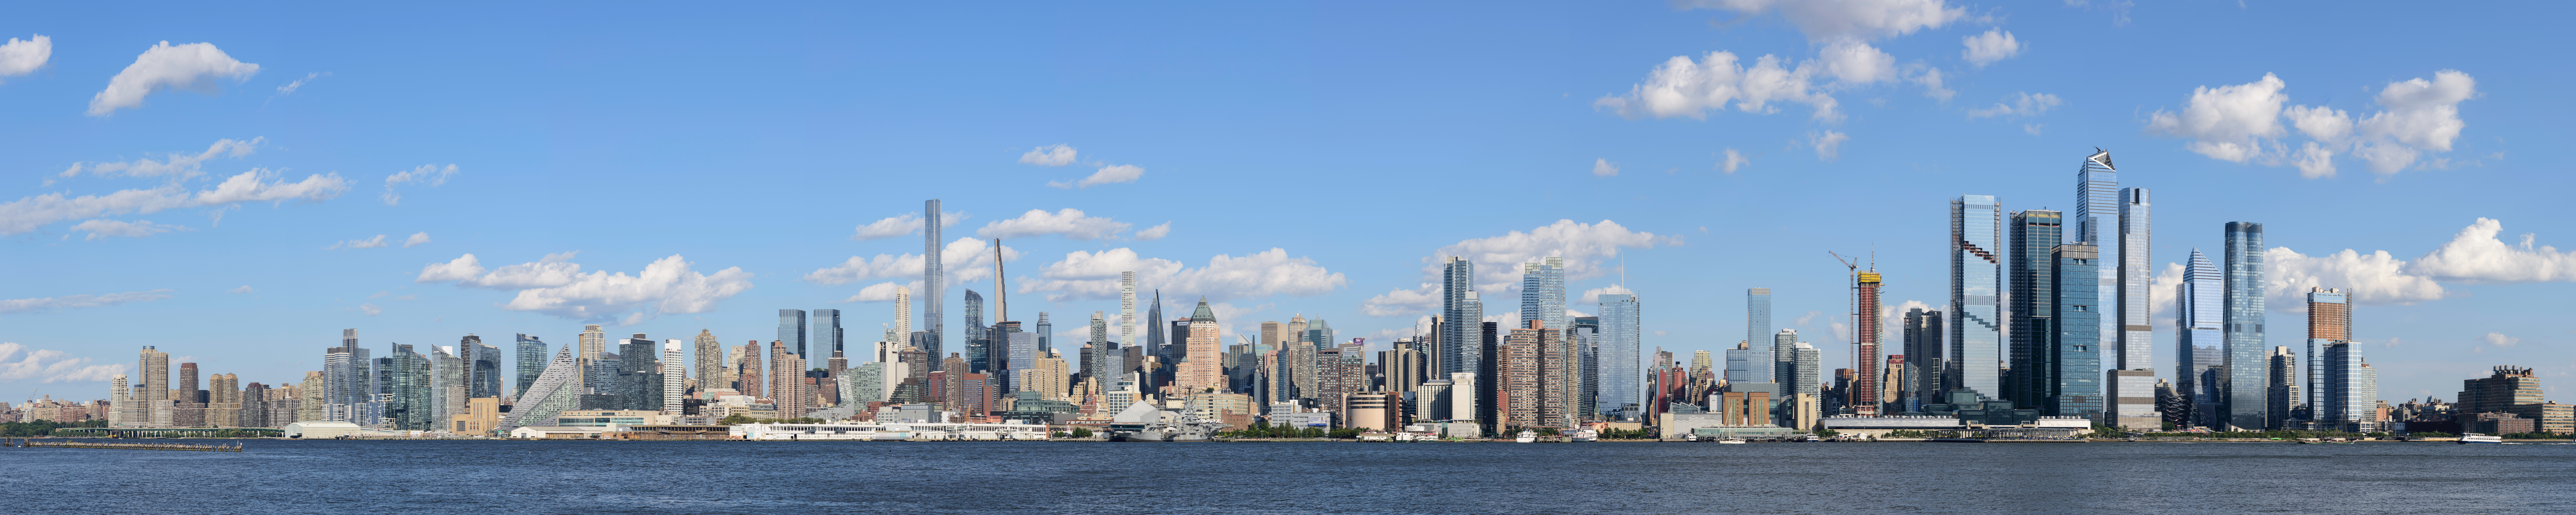 Ten-segment panorama of Midtown Manhattan, New York City, as viewed from Weehawken, New Jersey by King of Hearts